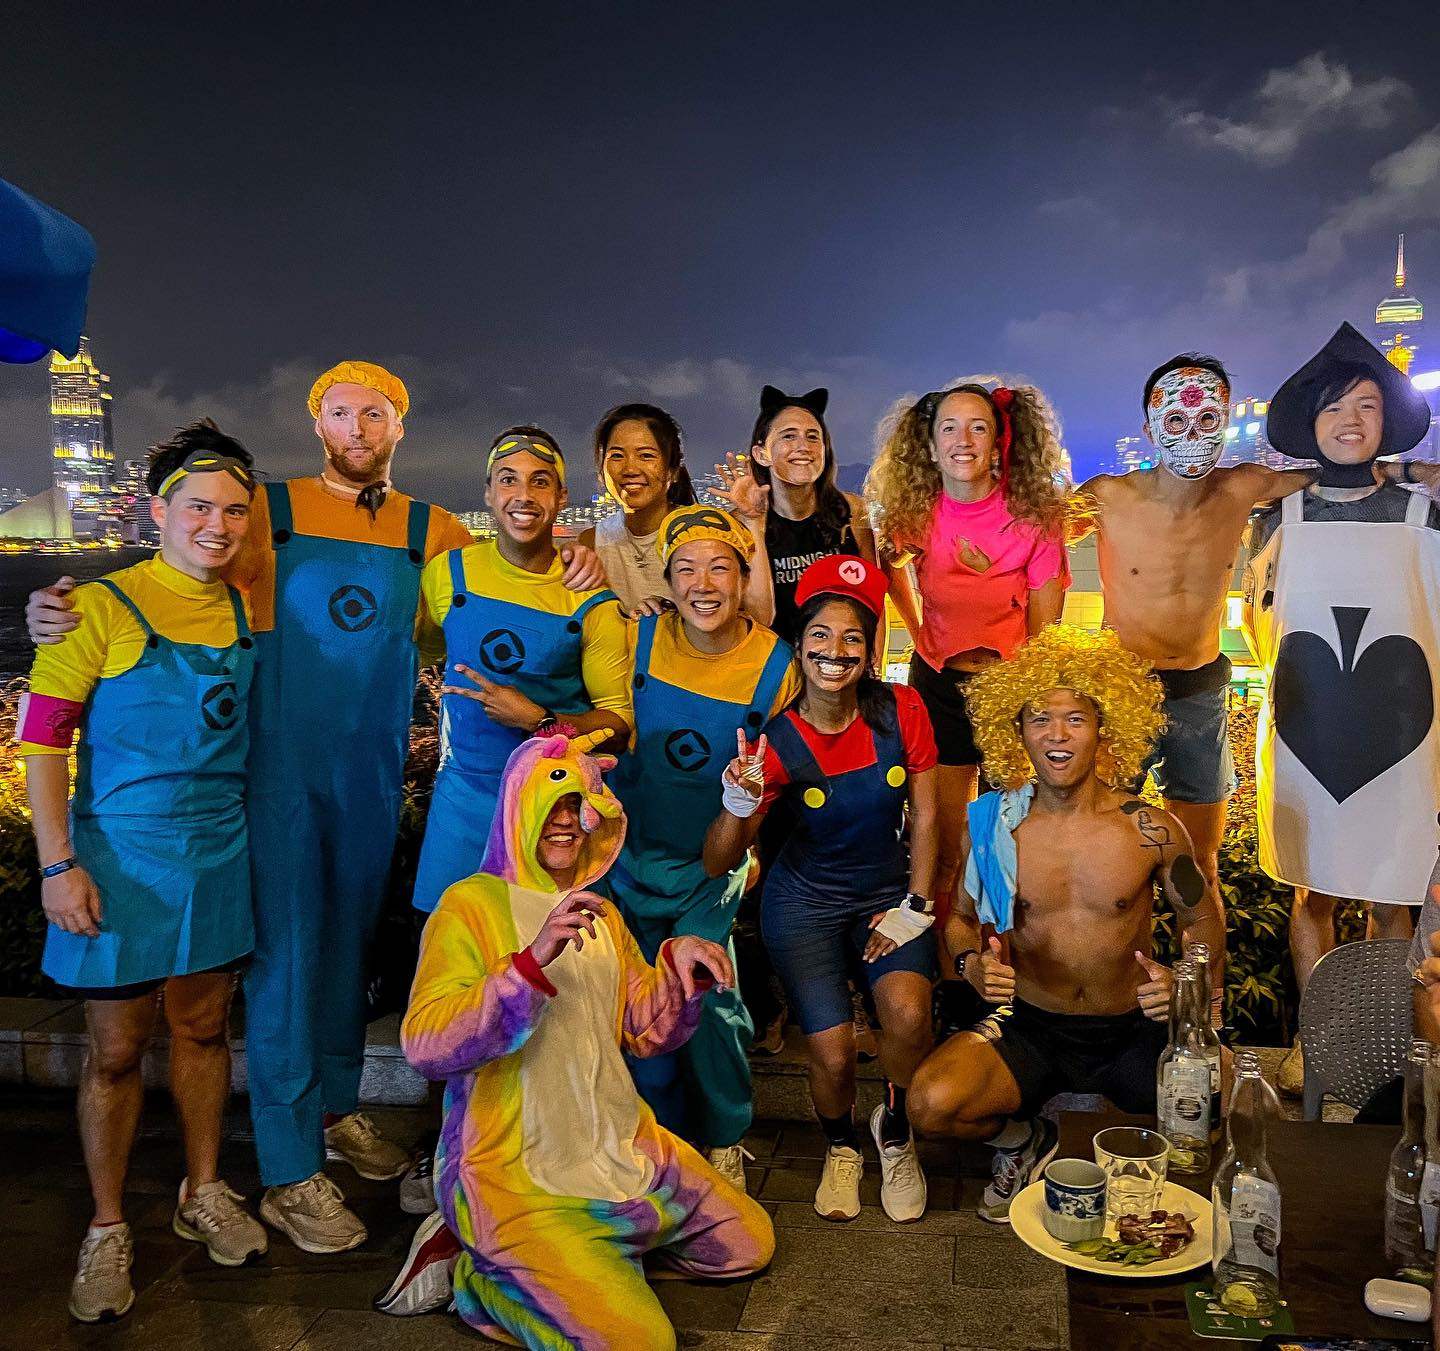 Midnight Runners’ Halloween run will take this place on October 26 this year, starting and finishing in Hong Kong’s Central neighbourhood. The event is one of several upcoming Halloween-themed runs in the city. Photo: Midnight Runners